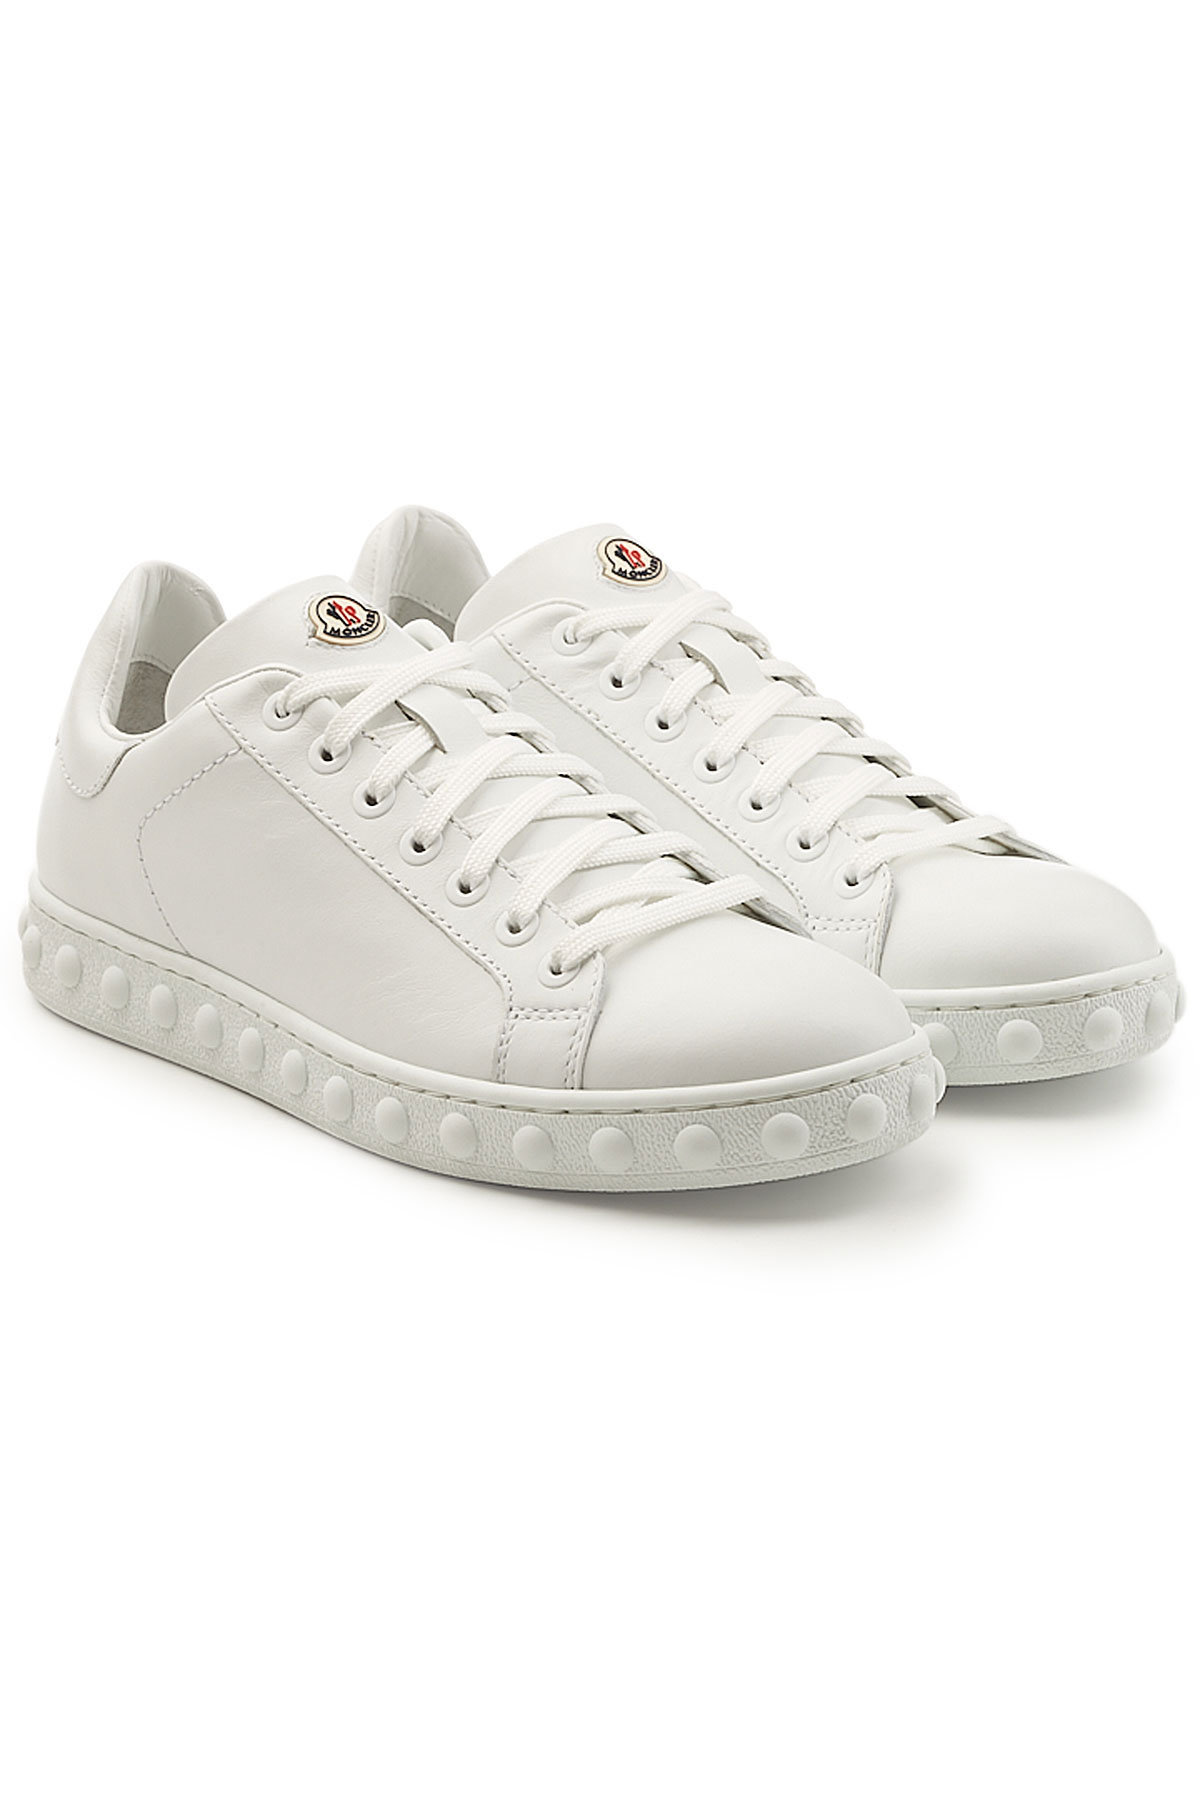 Moncler - Fifi Leather Sneakers